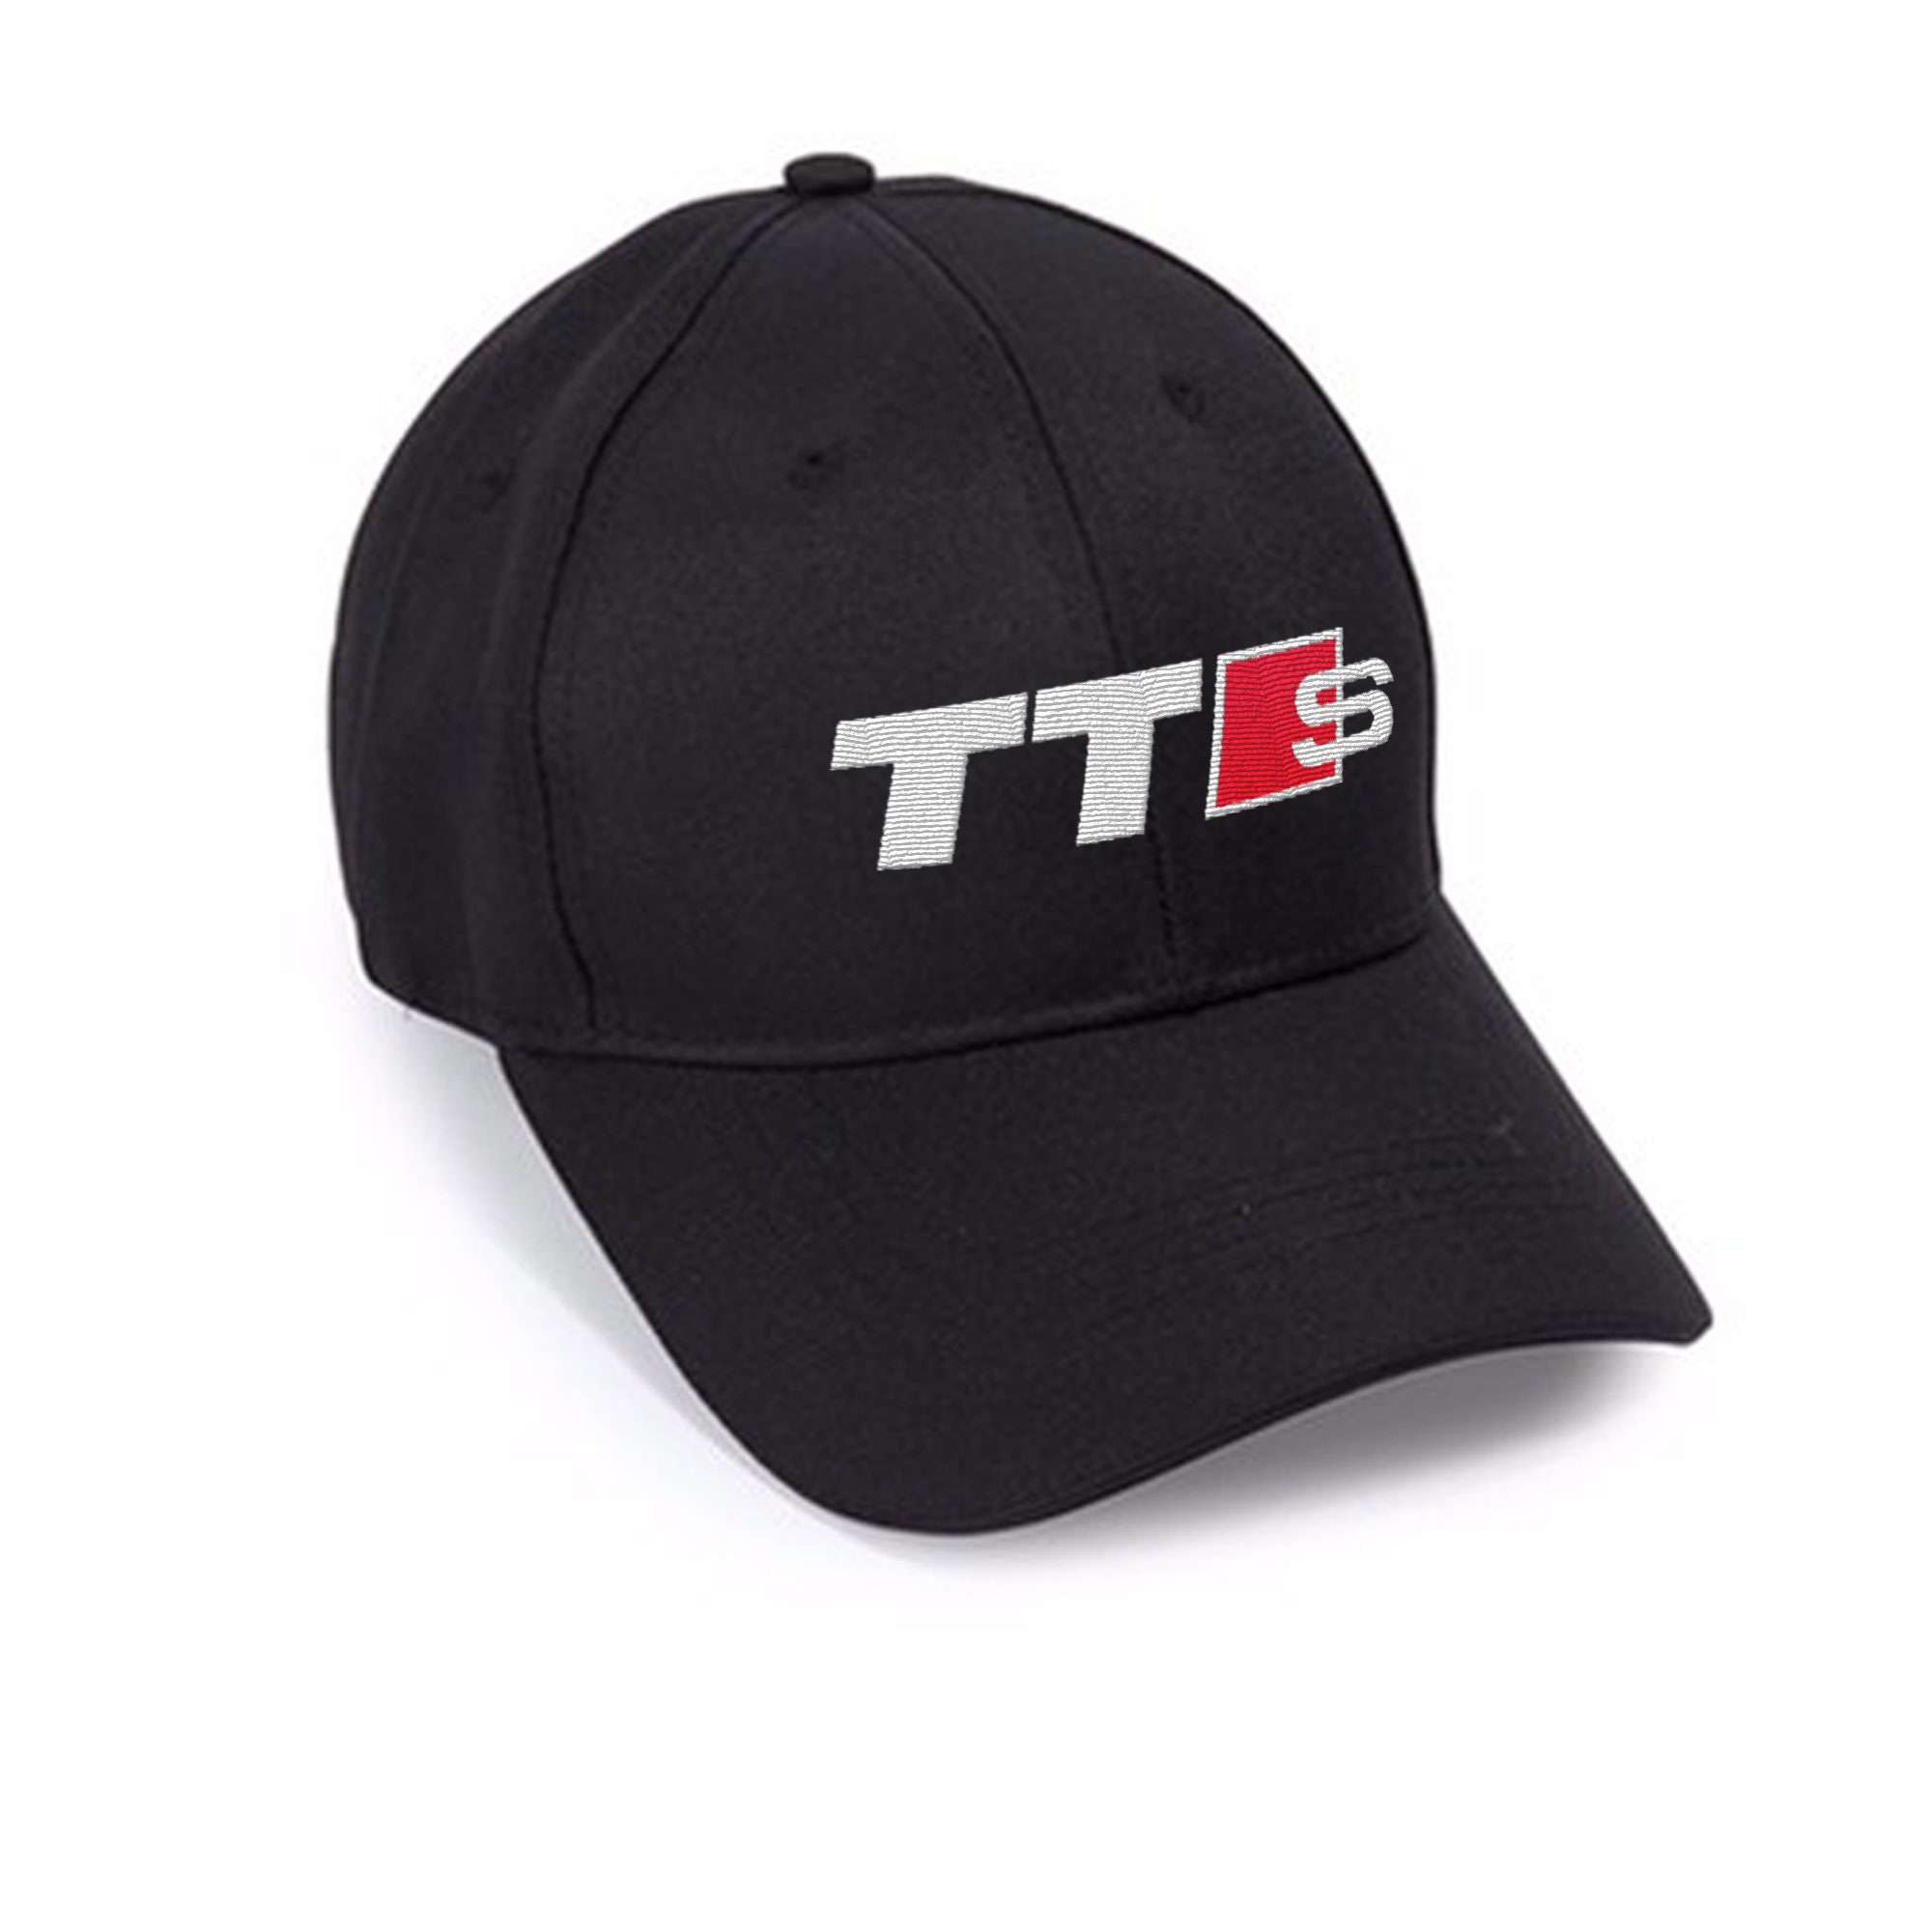 Audi TT Embroidery hat, baseball embroidered cap